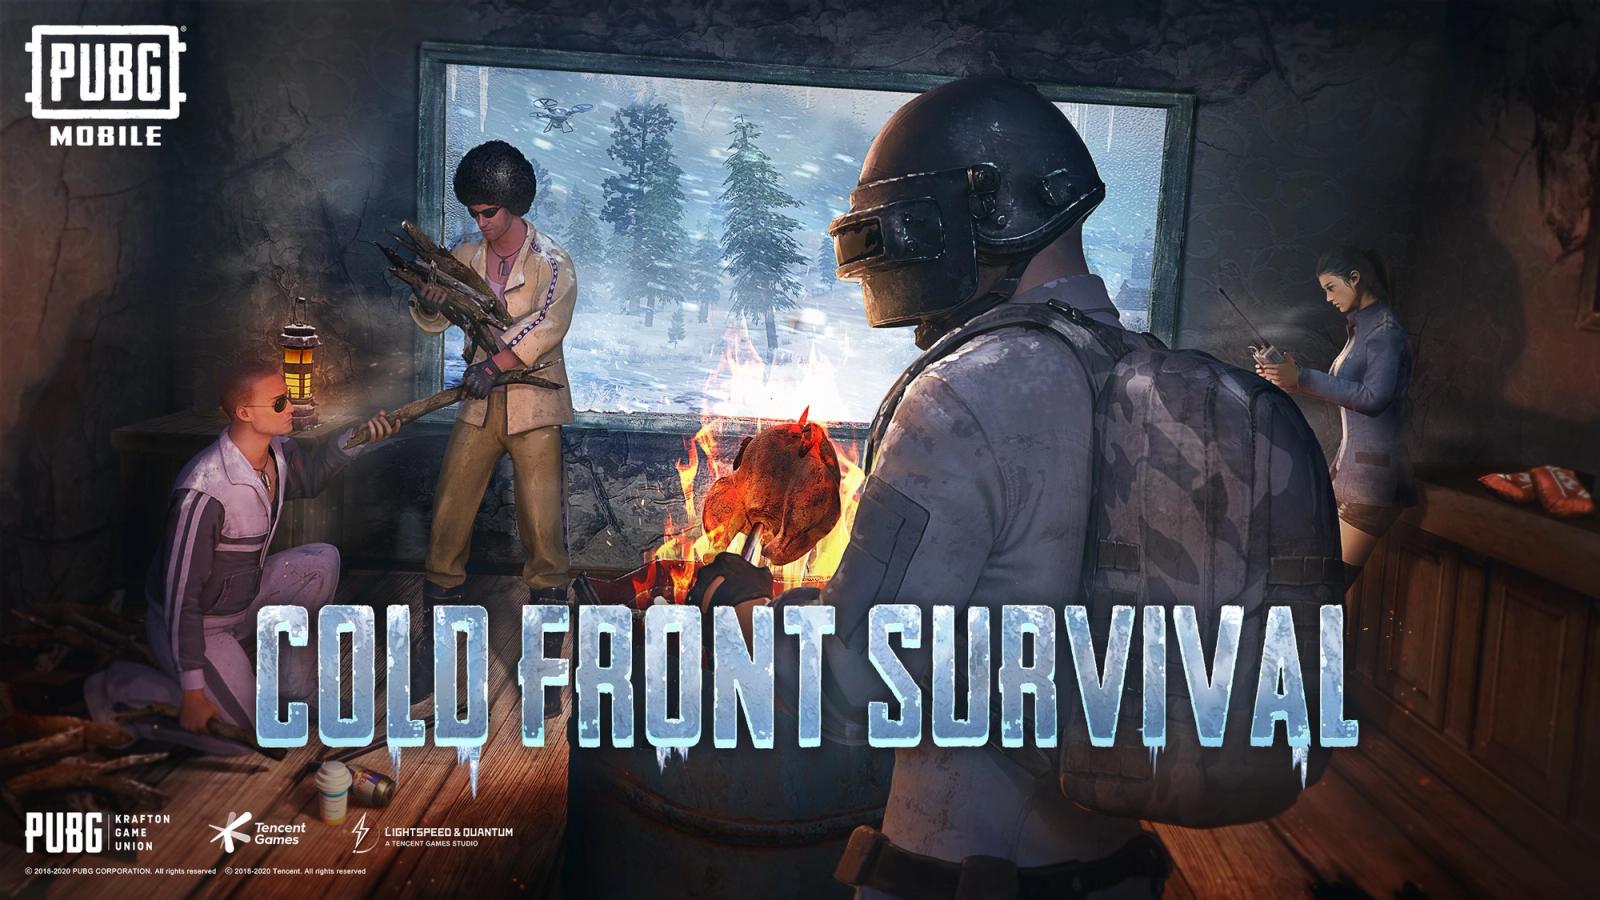 Branches and chicken dinners will be key to keeping your body temperature up in PUBG Mobile's new mode Cold Front Survival.